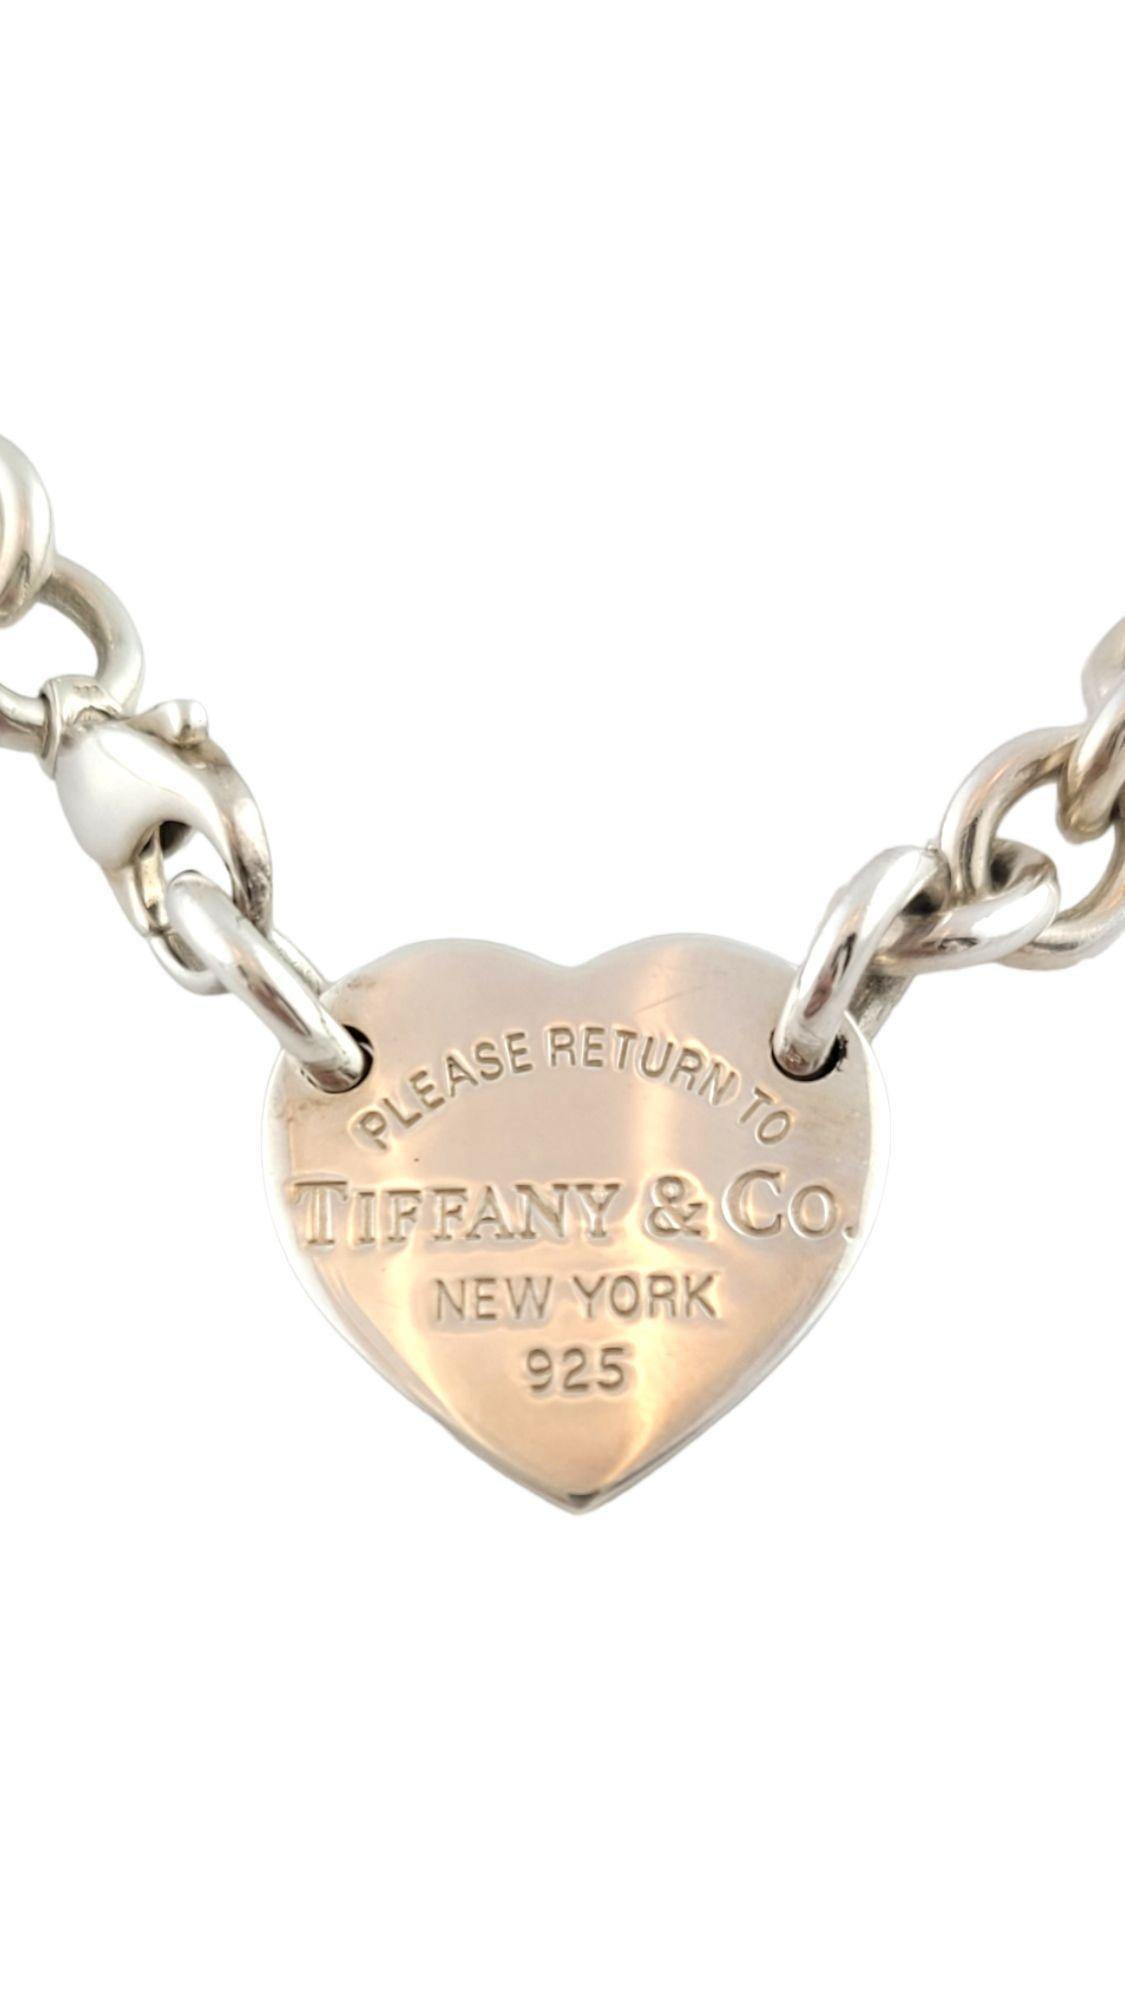 Gorgeous link necklace with return to Tiffany heart tag crafted from sterling silver by creator Tiffany & Co.!

Length: 15